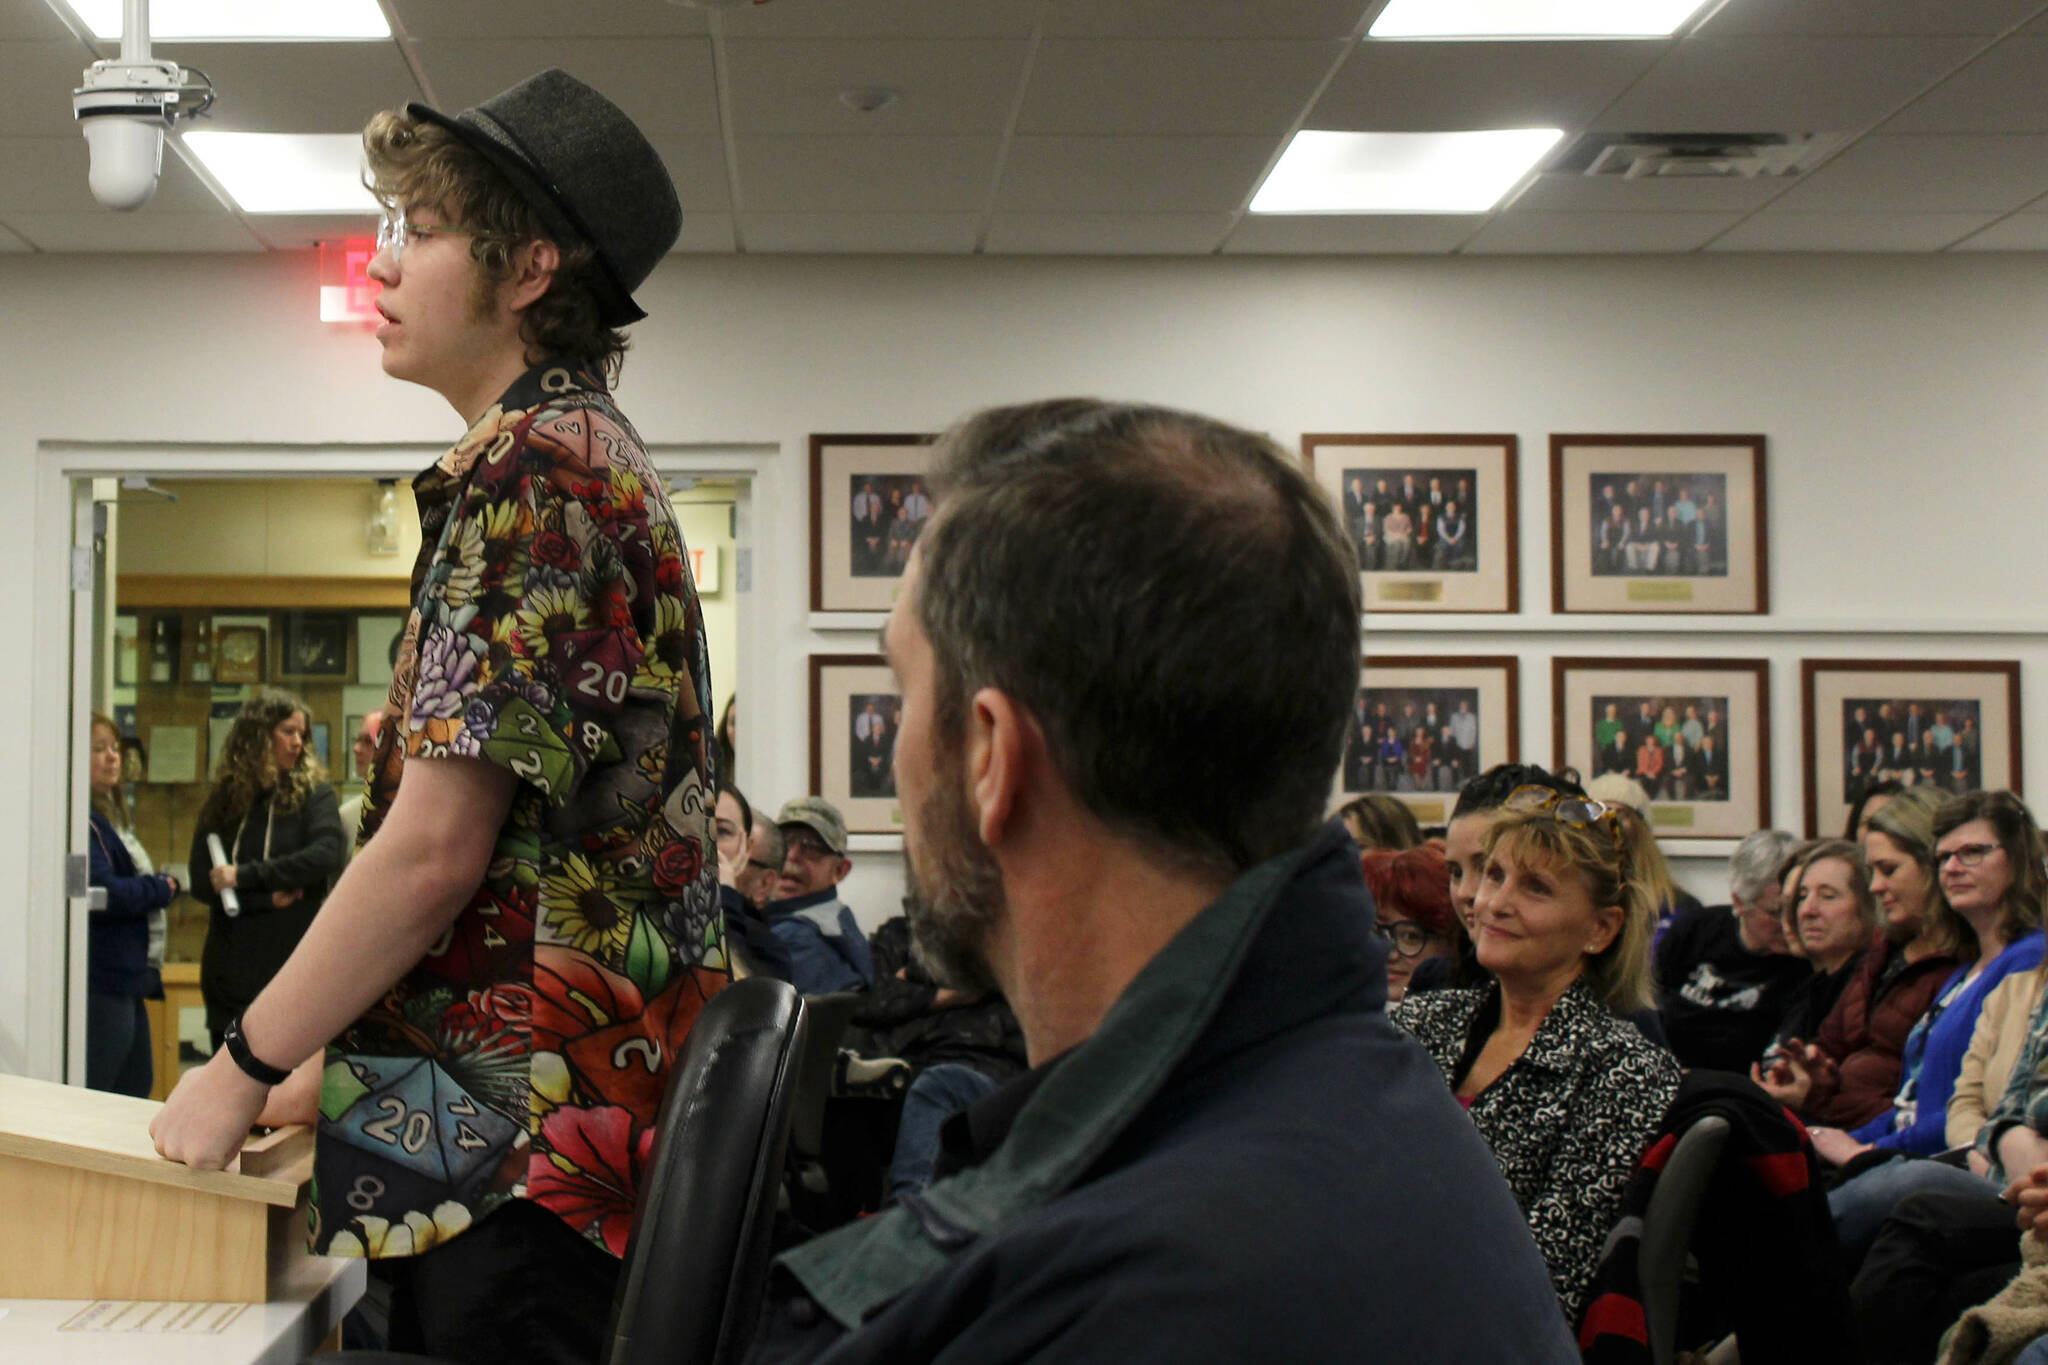 Soldotna High School senior Josiah Burton testifies in opposition to the proposed cut of Kenai Peninsula Borough School District theater technicians while audience members look on during a board of education meeting on Monday, March 6, 2023, in Soldotna, Alaska. (Ashlyn O’Hara/Peninsula Clarion)